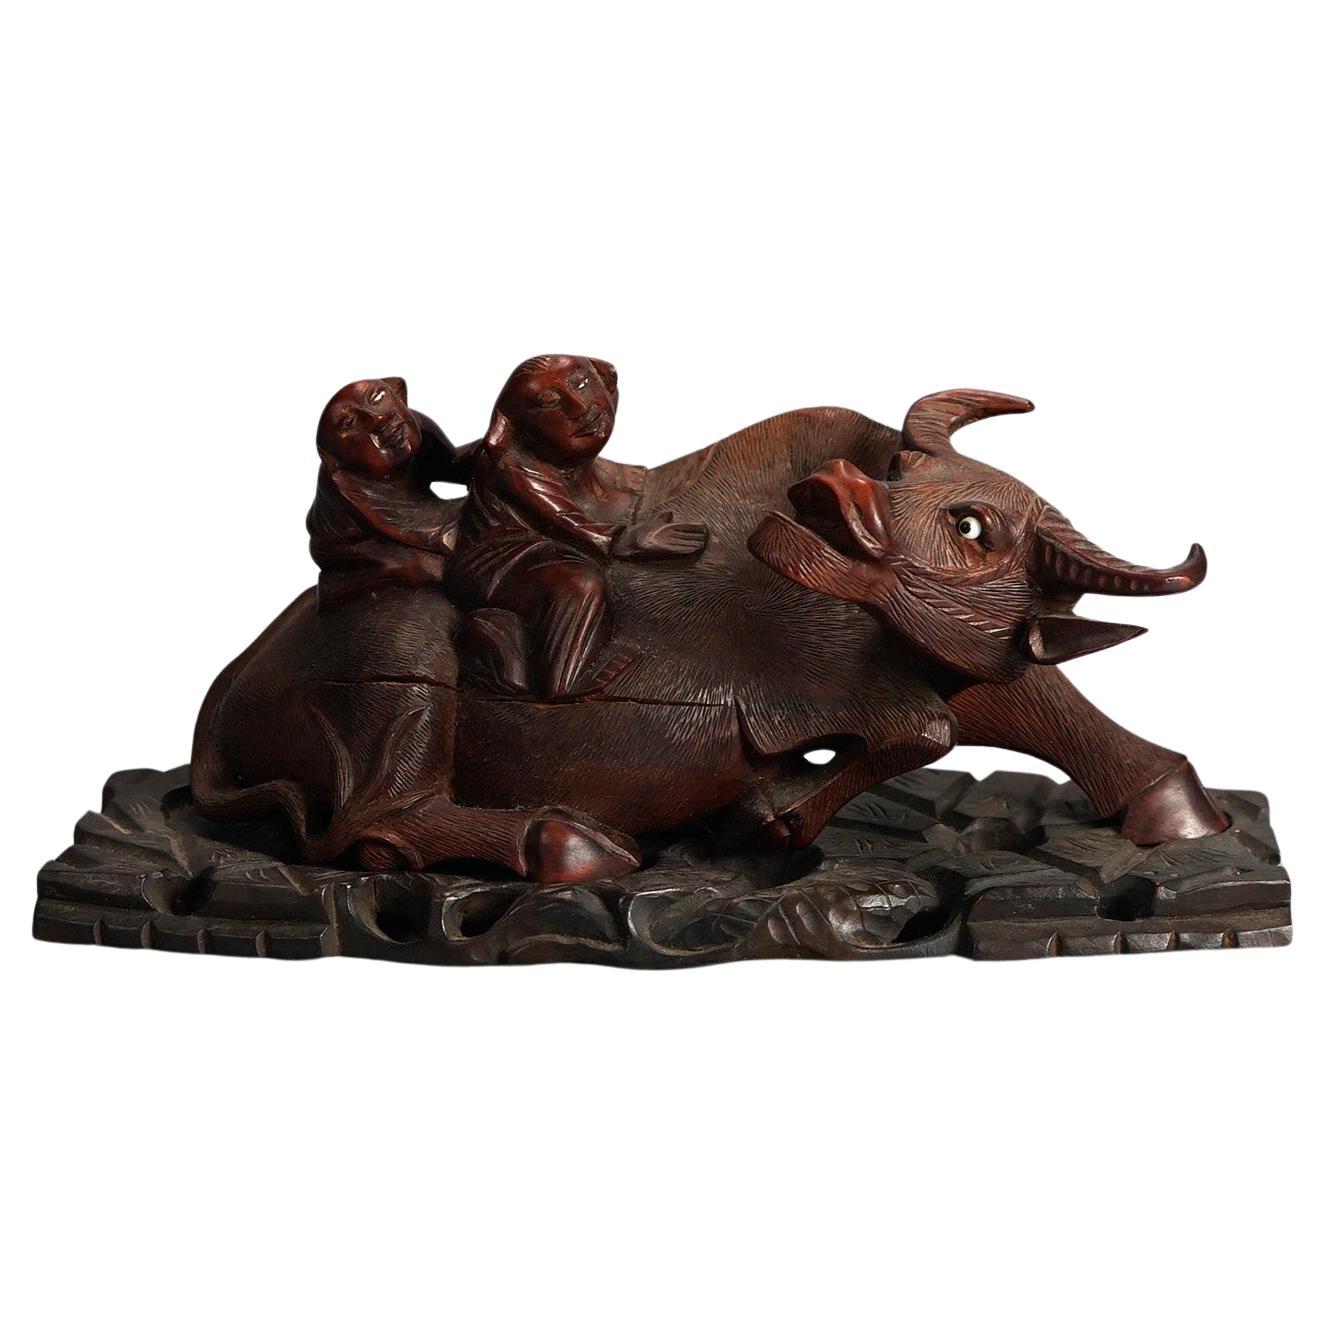 Antique Chinese Carved Wood Sculpture of Water Buffalo with Figures C1920 For Sale